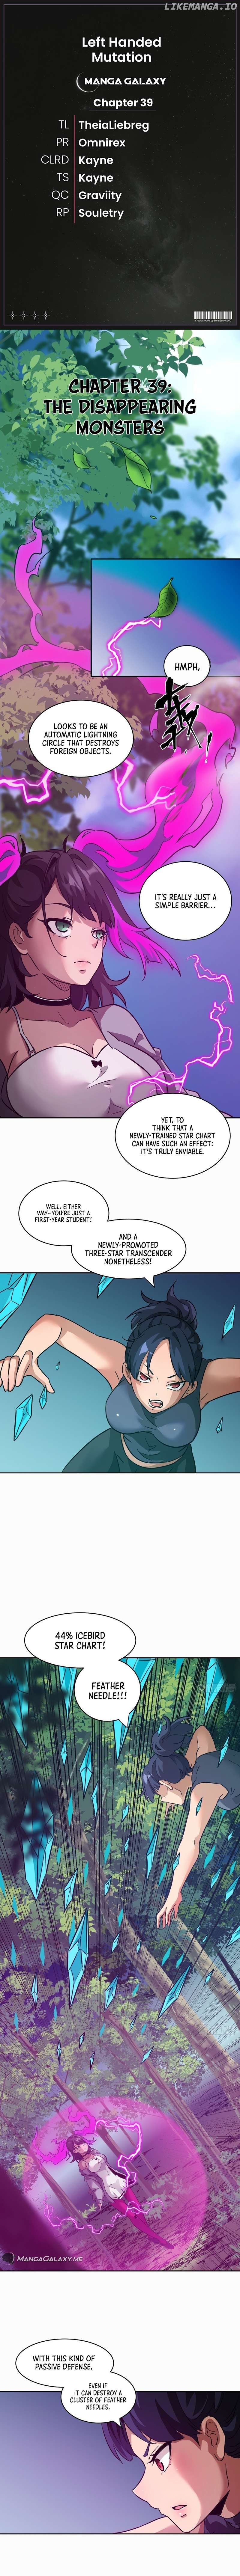 Left Handed Mutation Chapter 39 - page 1